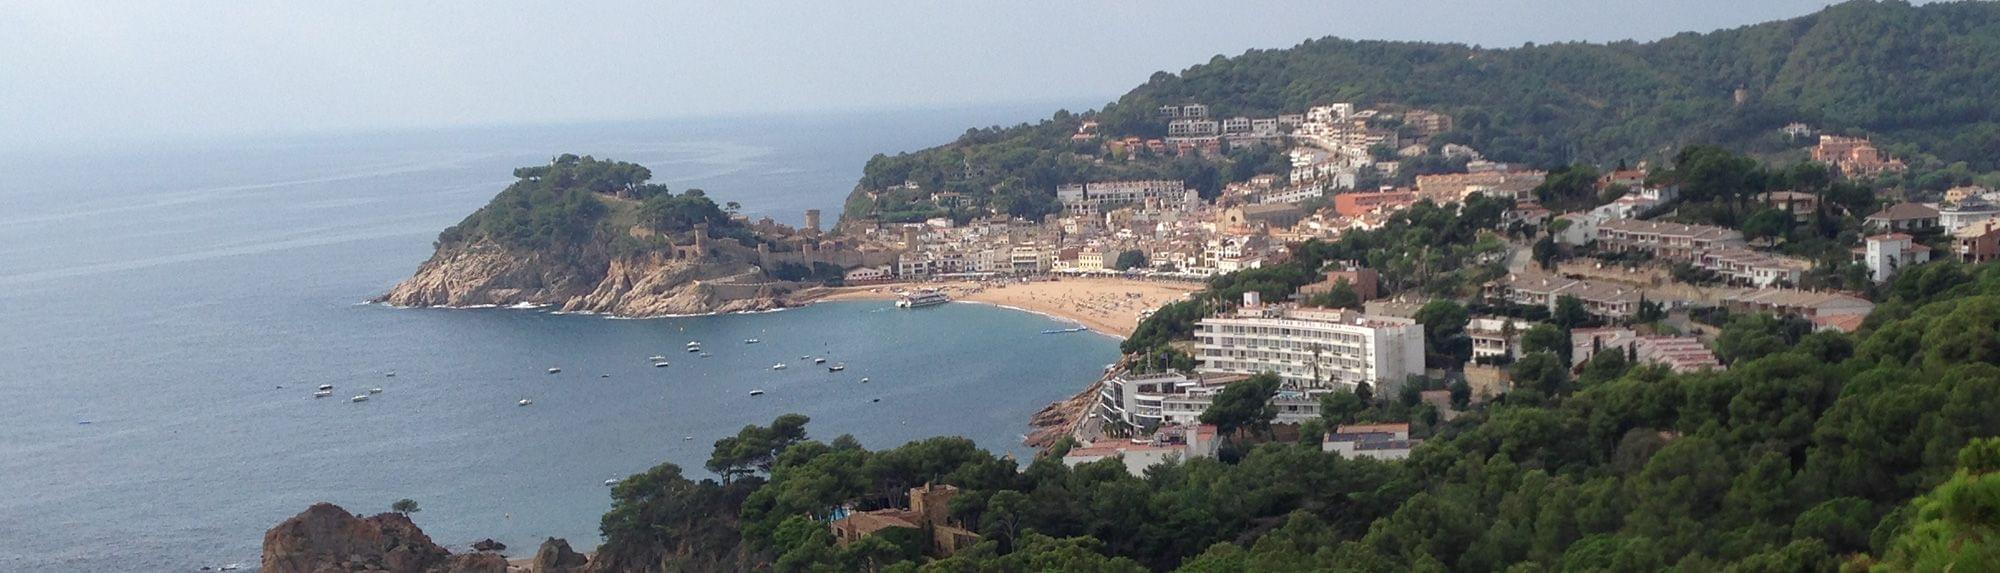 View of the Mediterranean Sea and a coastal town in Spain.